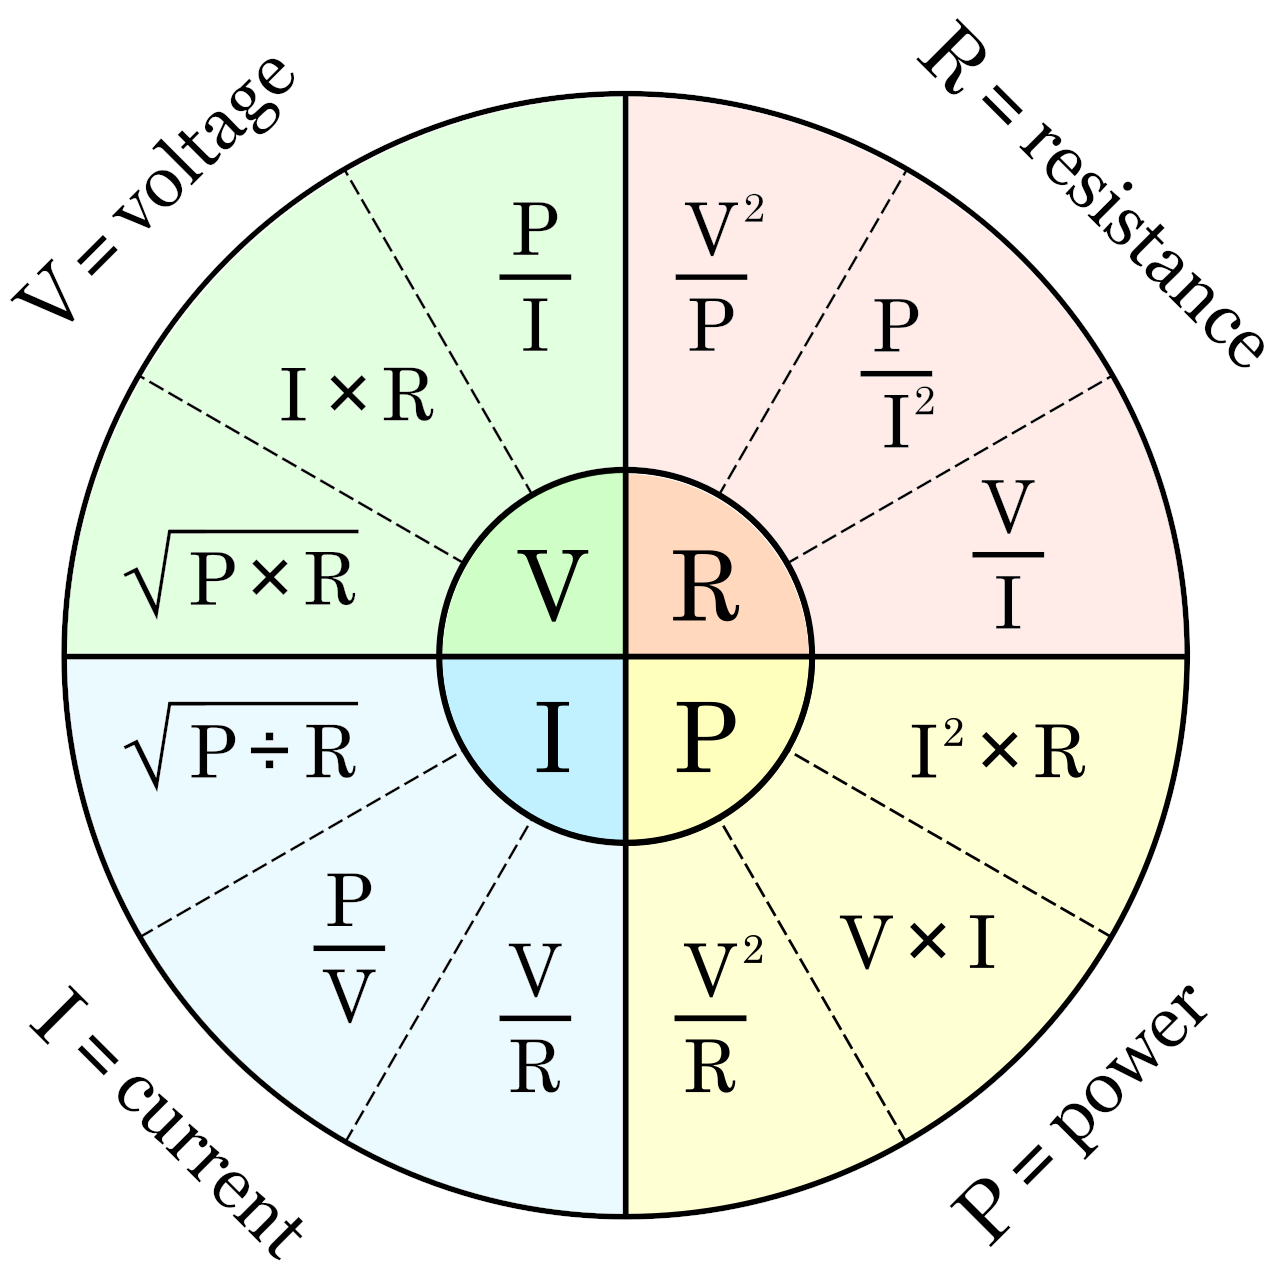 The wheel of Ohm's Law